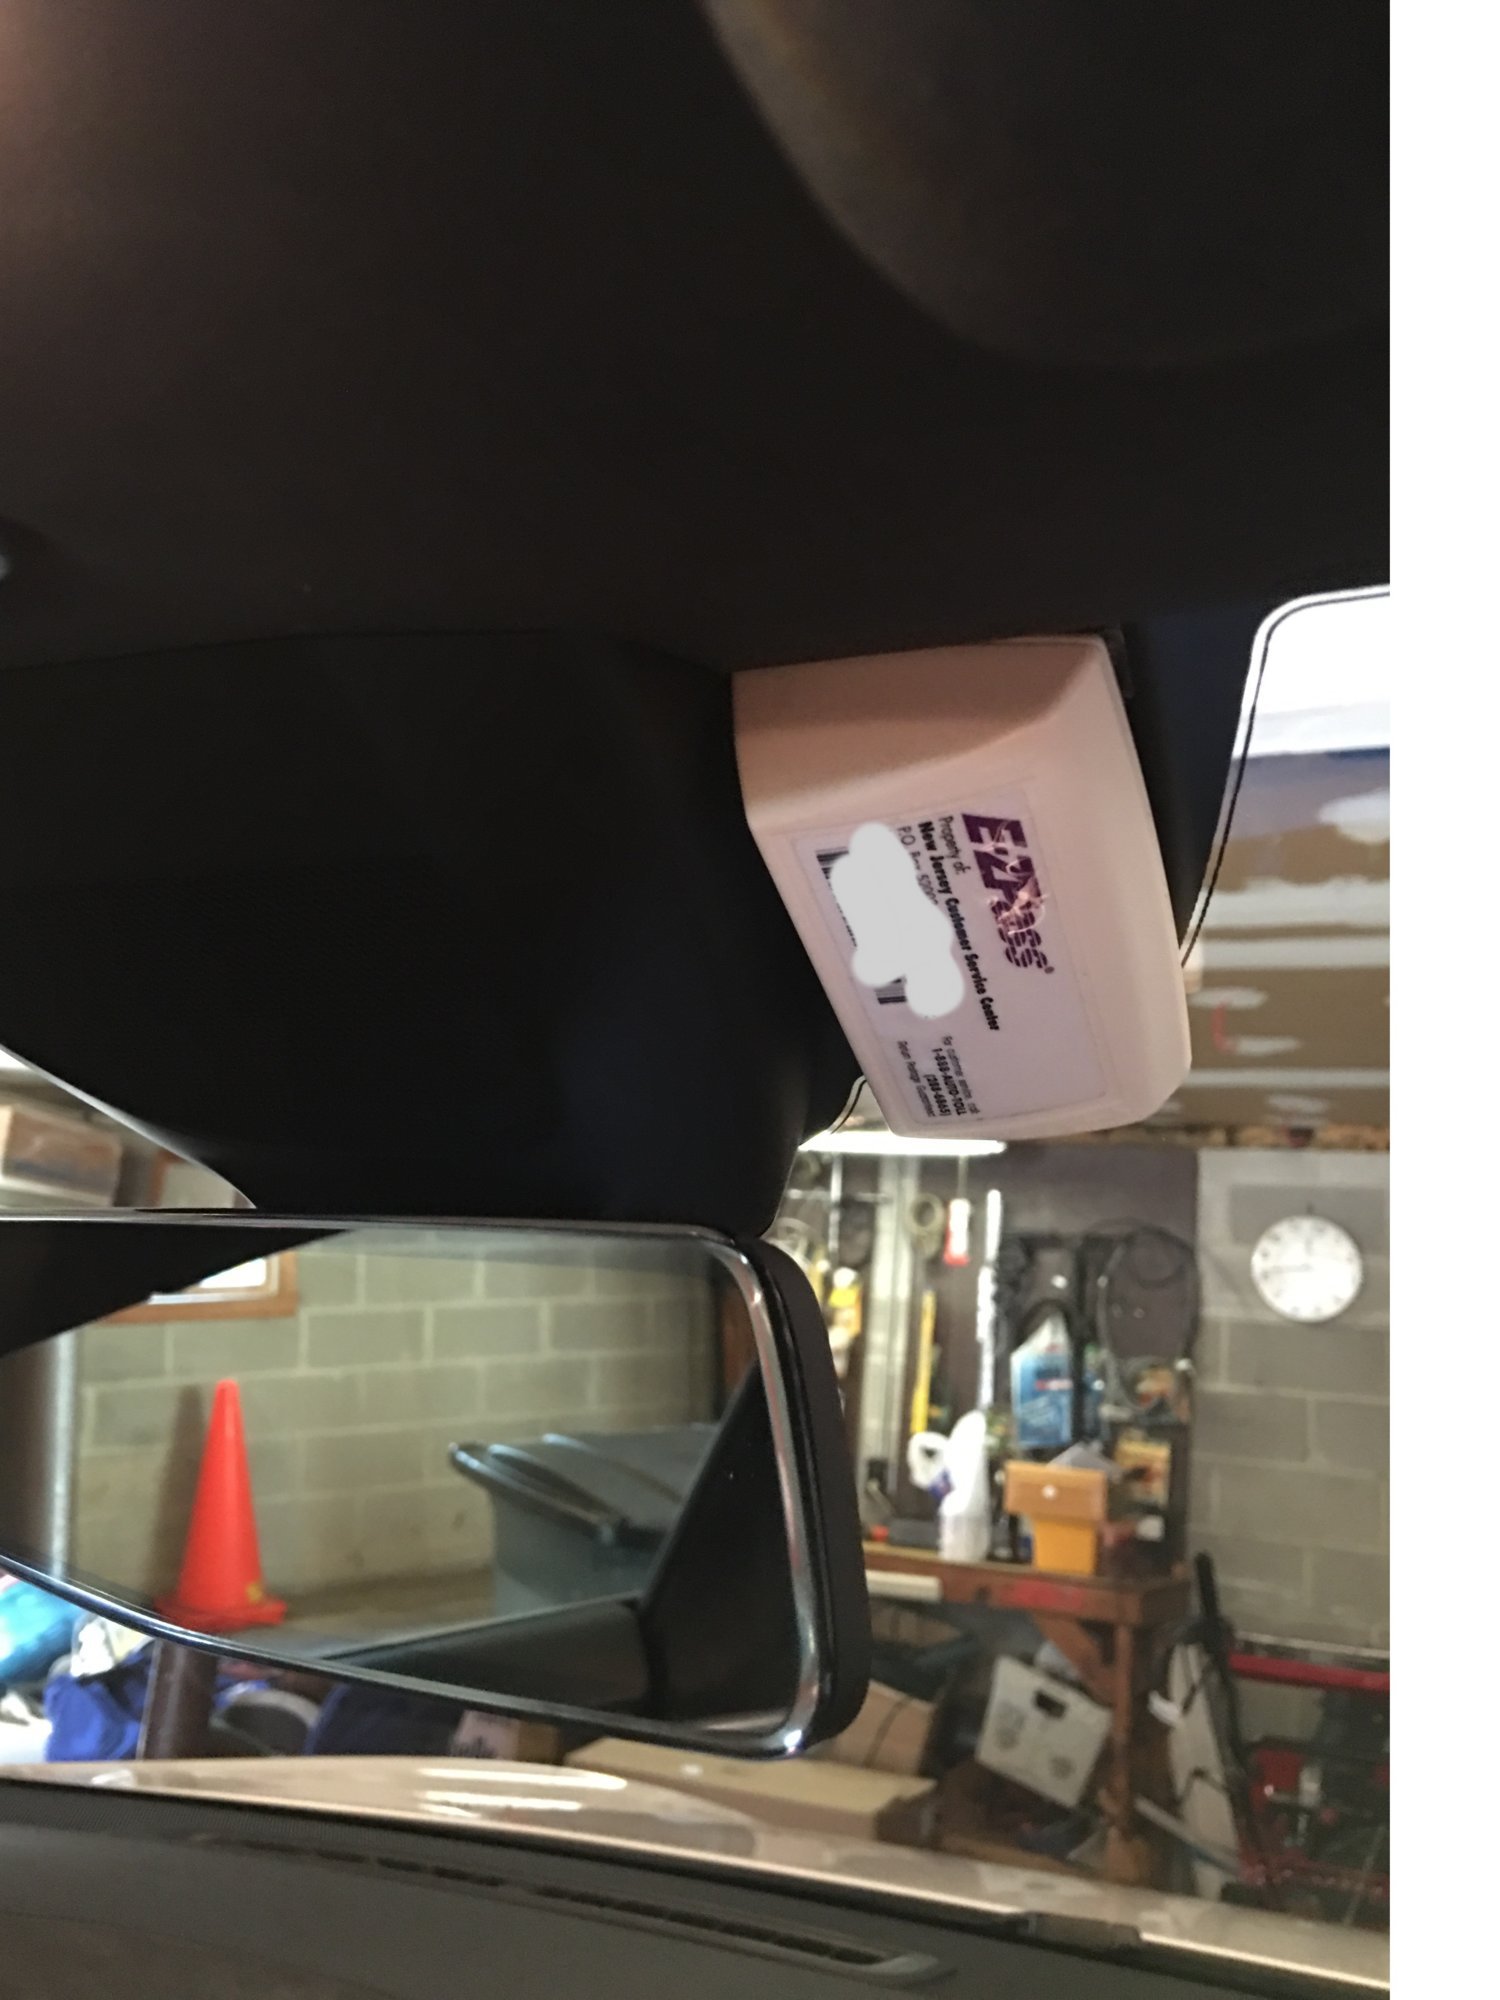 You know that Velcro that they give you with your EZ PASS to stick it to  the windshield? : r/boston